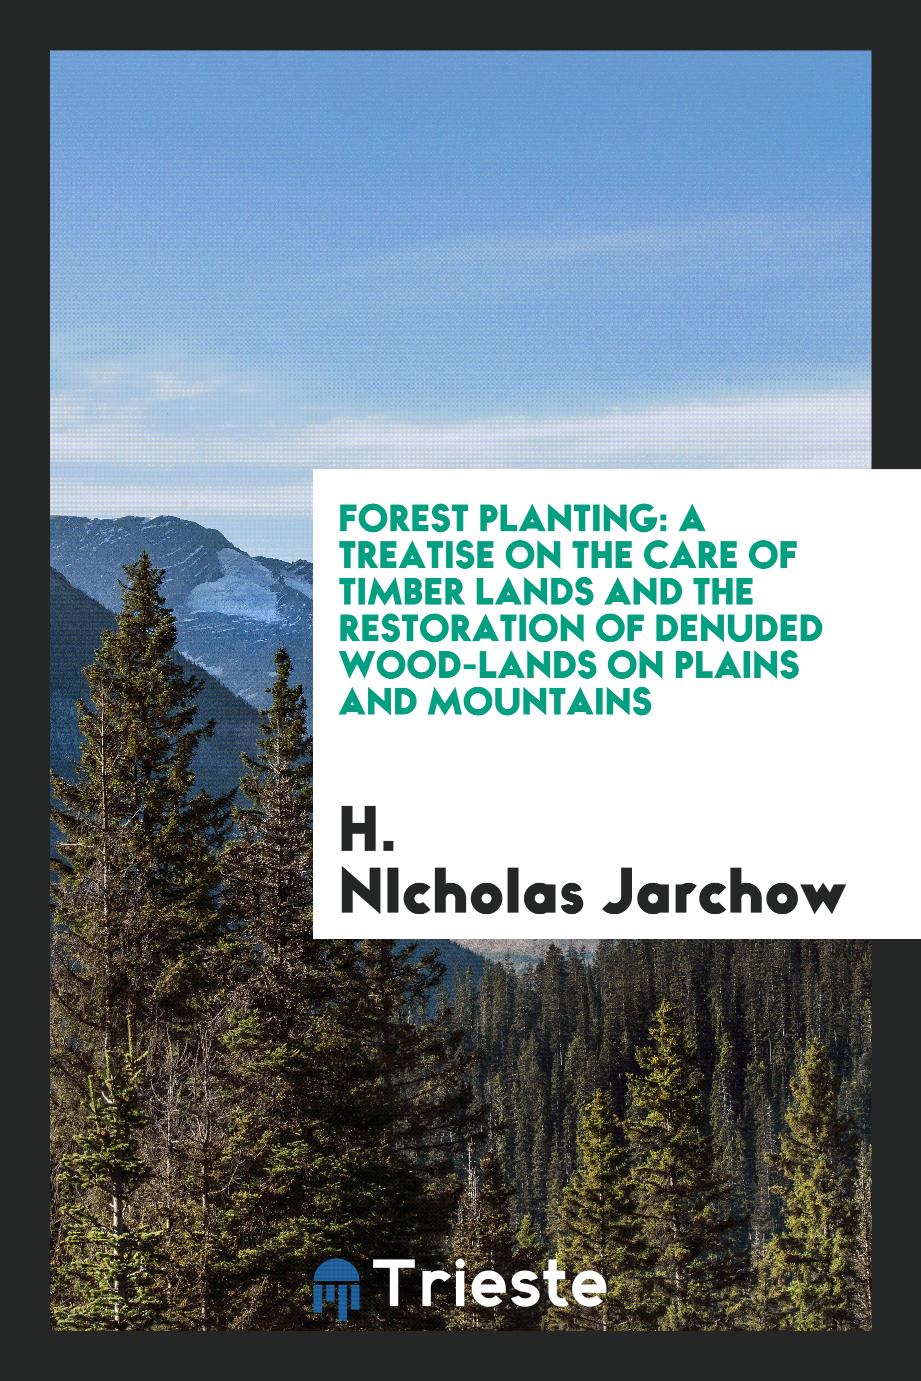 Forest Planting: A Treatise on the Care of Timber Lands and the Restoration of Denuded Wood-Lands on Plains and Mountains